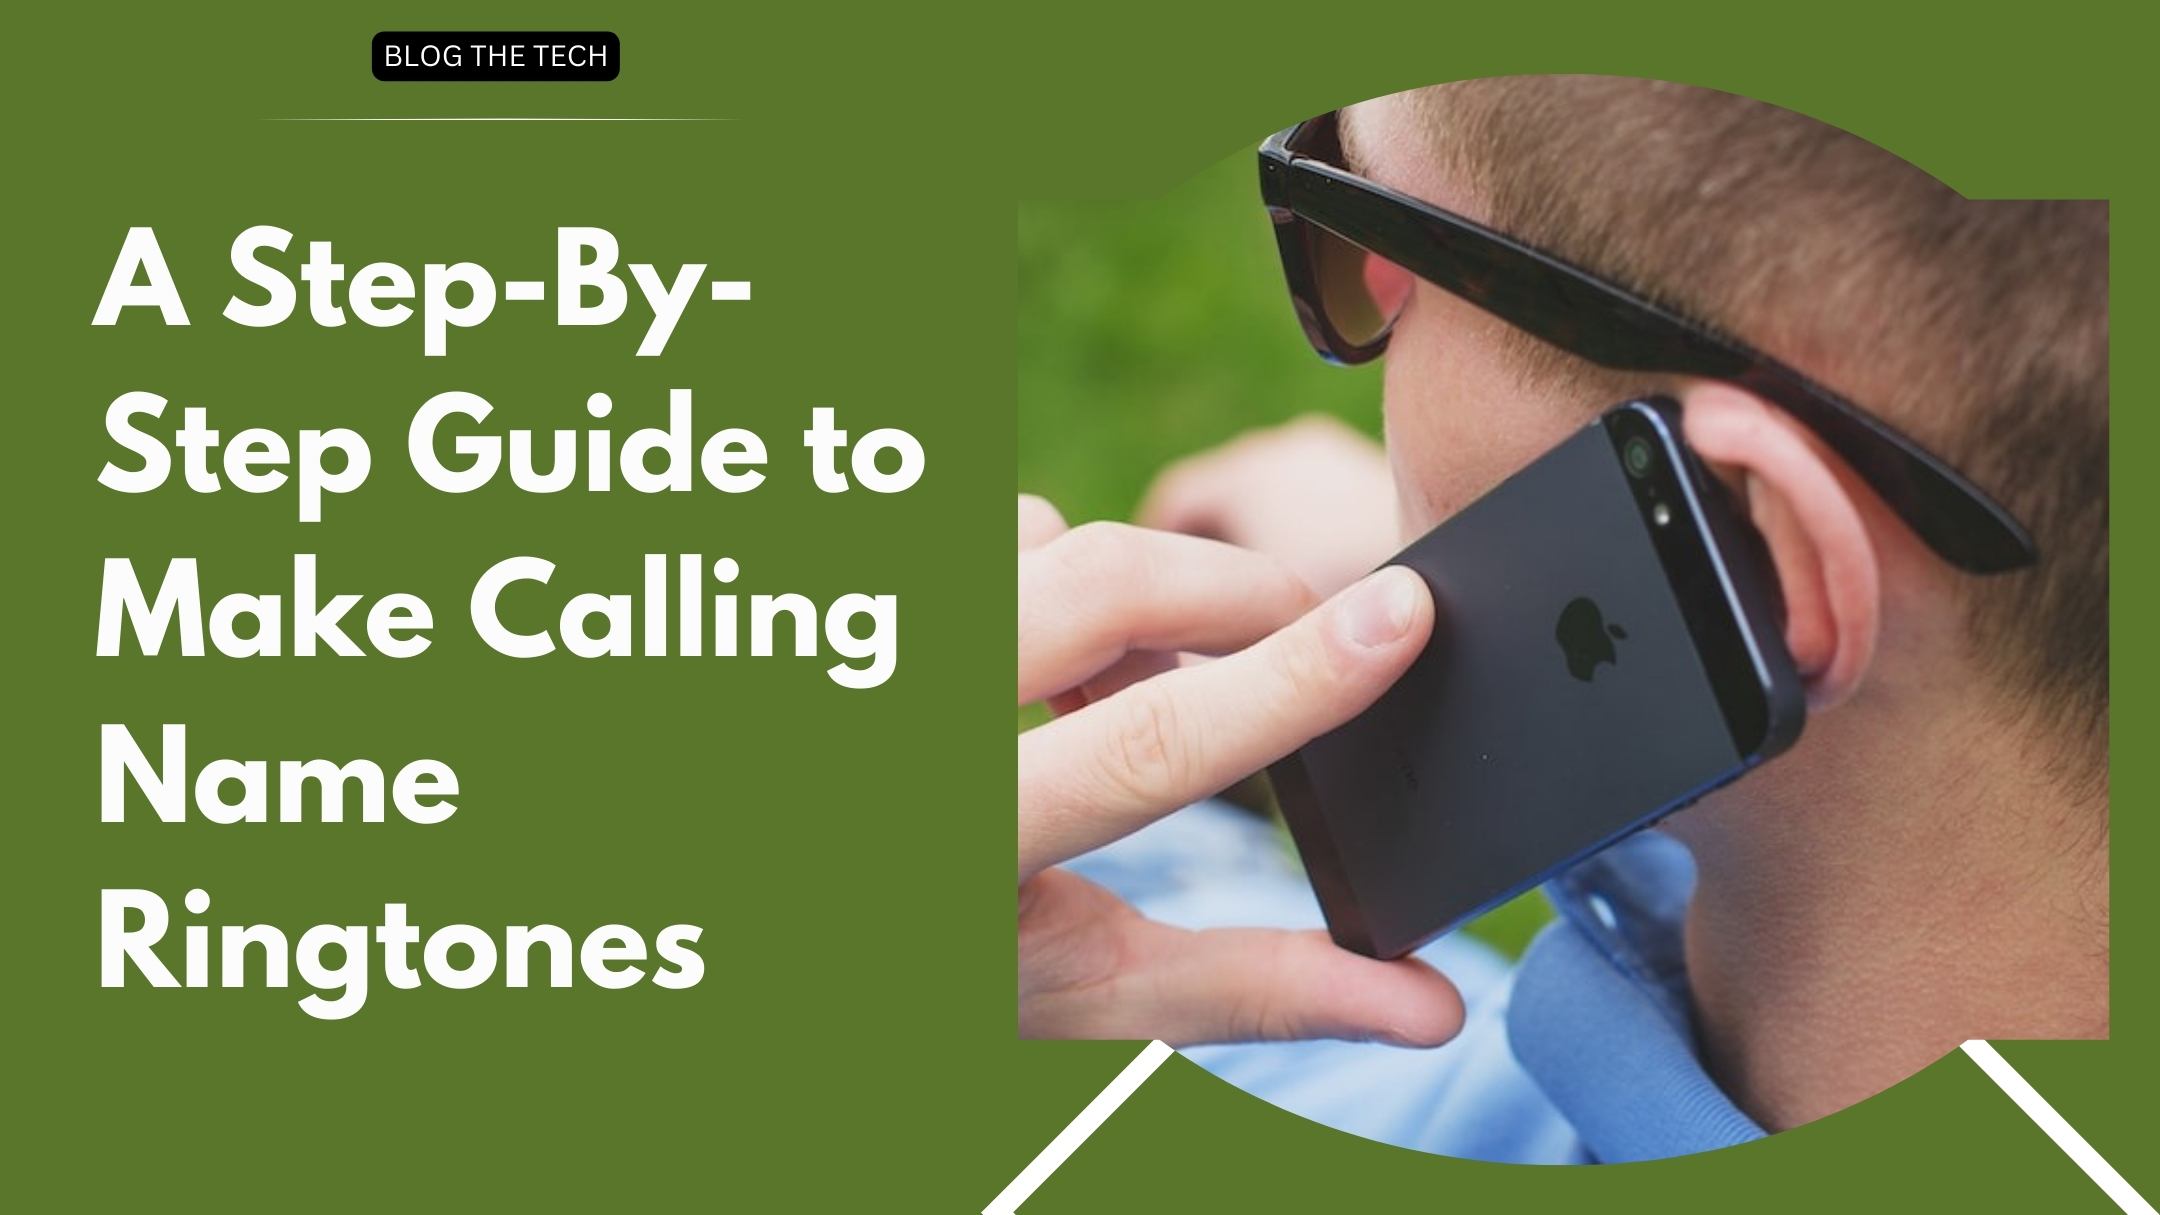 step-by-step-guide-to-make-calling-name-ringtones-featured